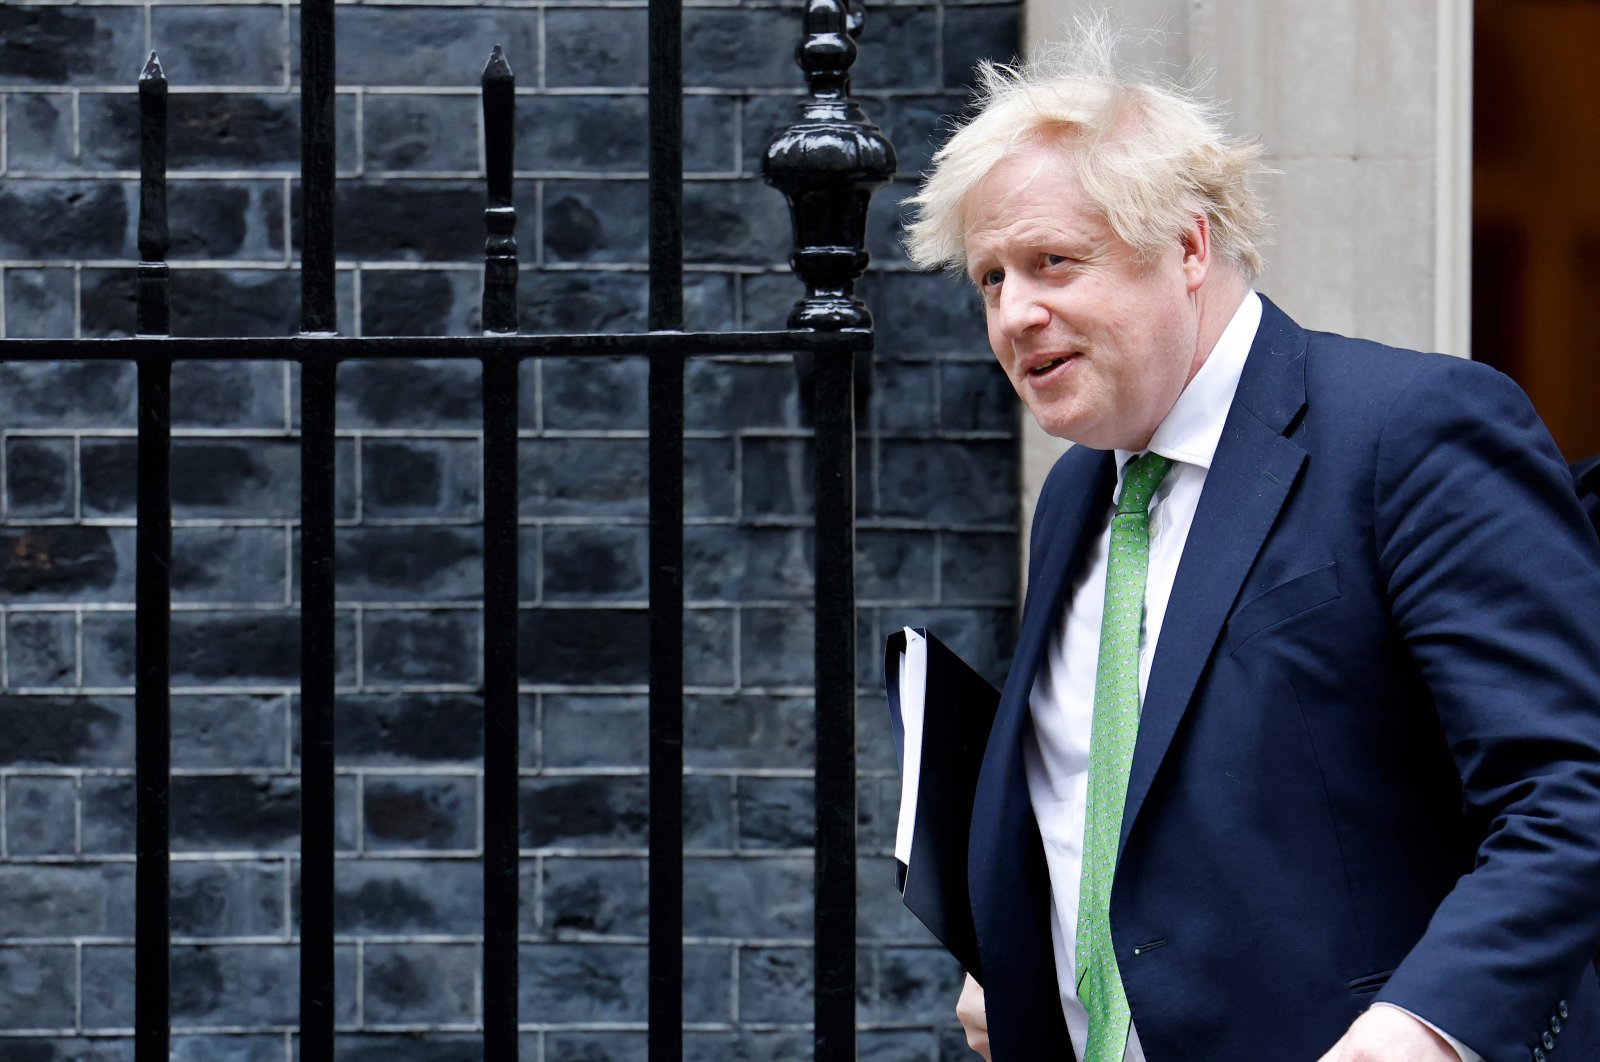 Britain&#039;s Prime Minister Boris Johnson leaves from 10 Downing Street in central London to make a statement on the situation in Ukraine to lawmakers at the Houses of Parliament, Britain, Feb. 22, 2022. (AFP Photo)